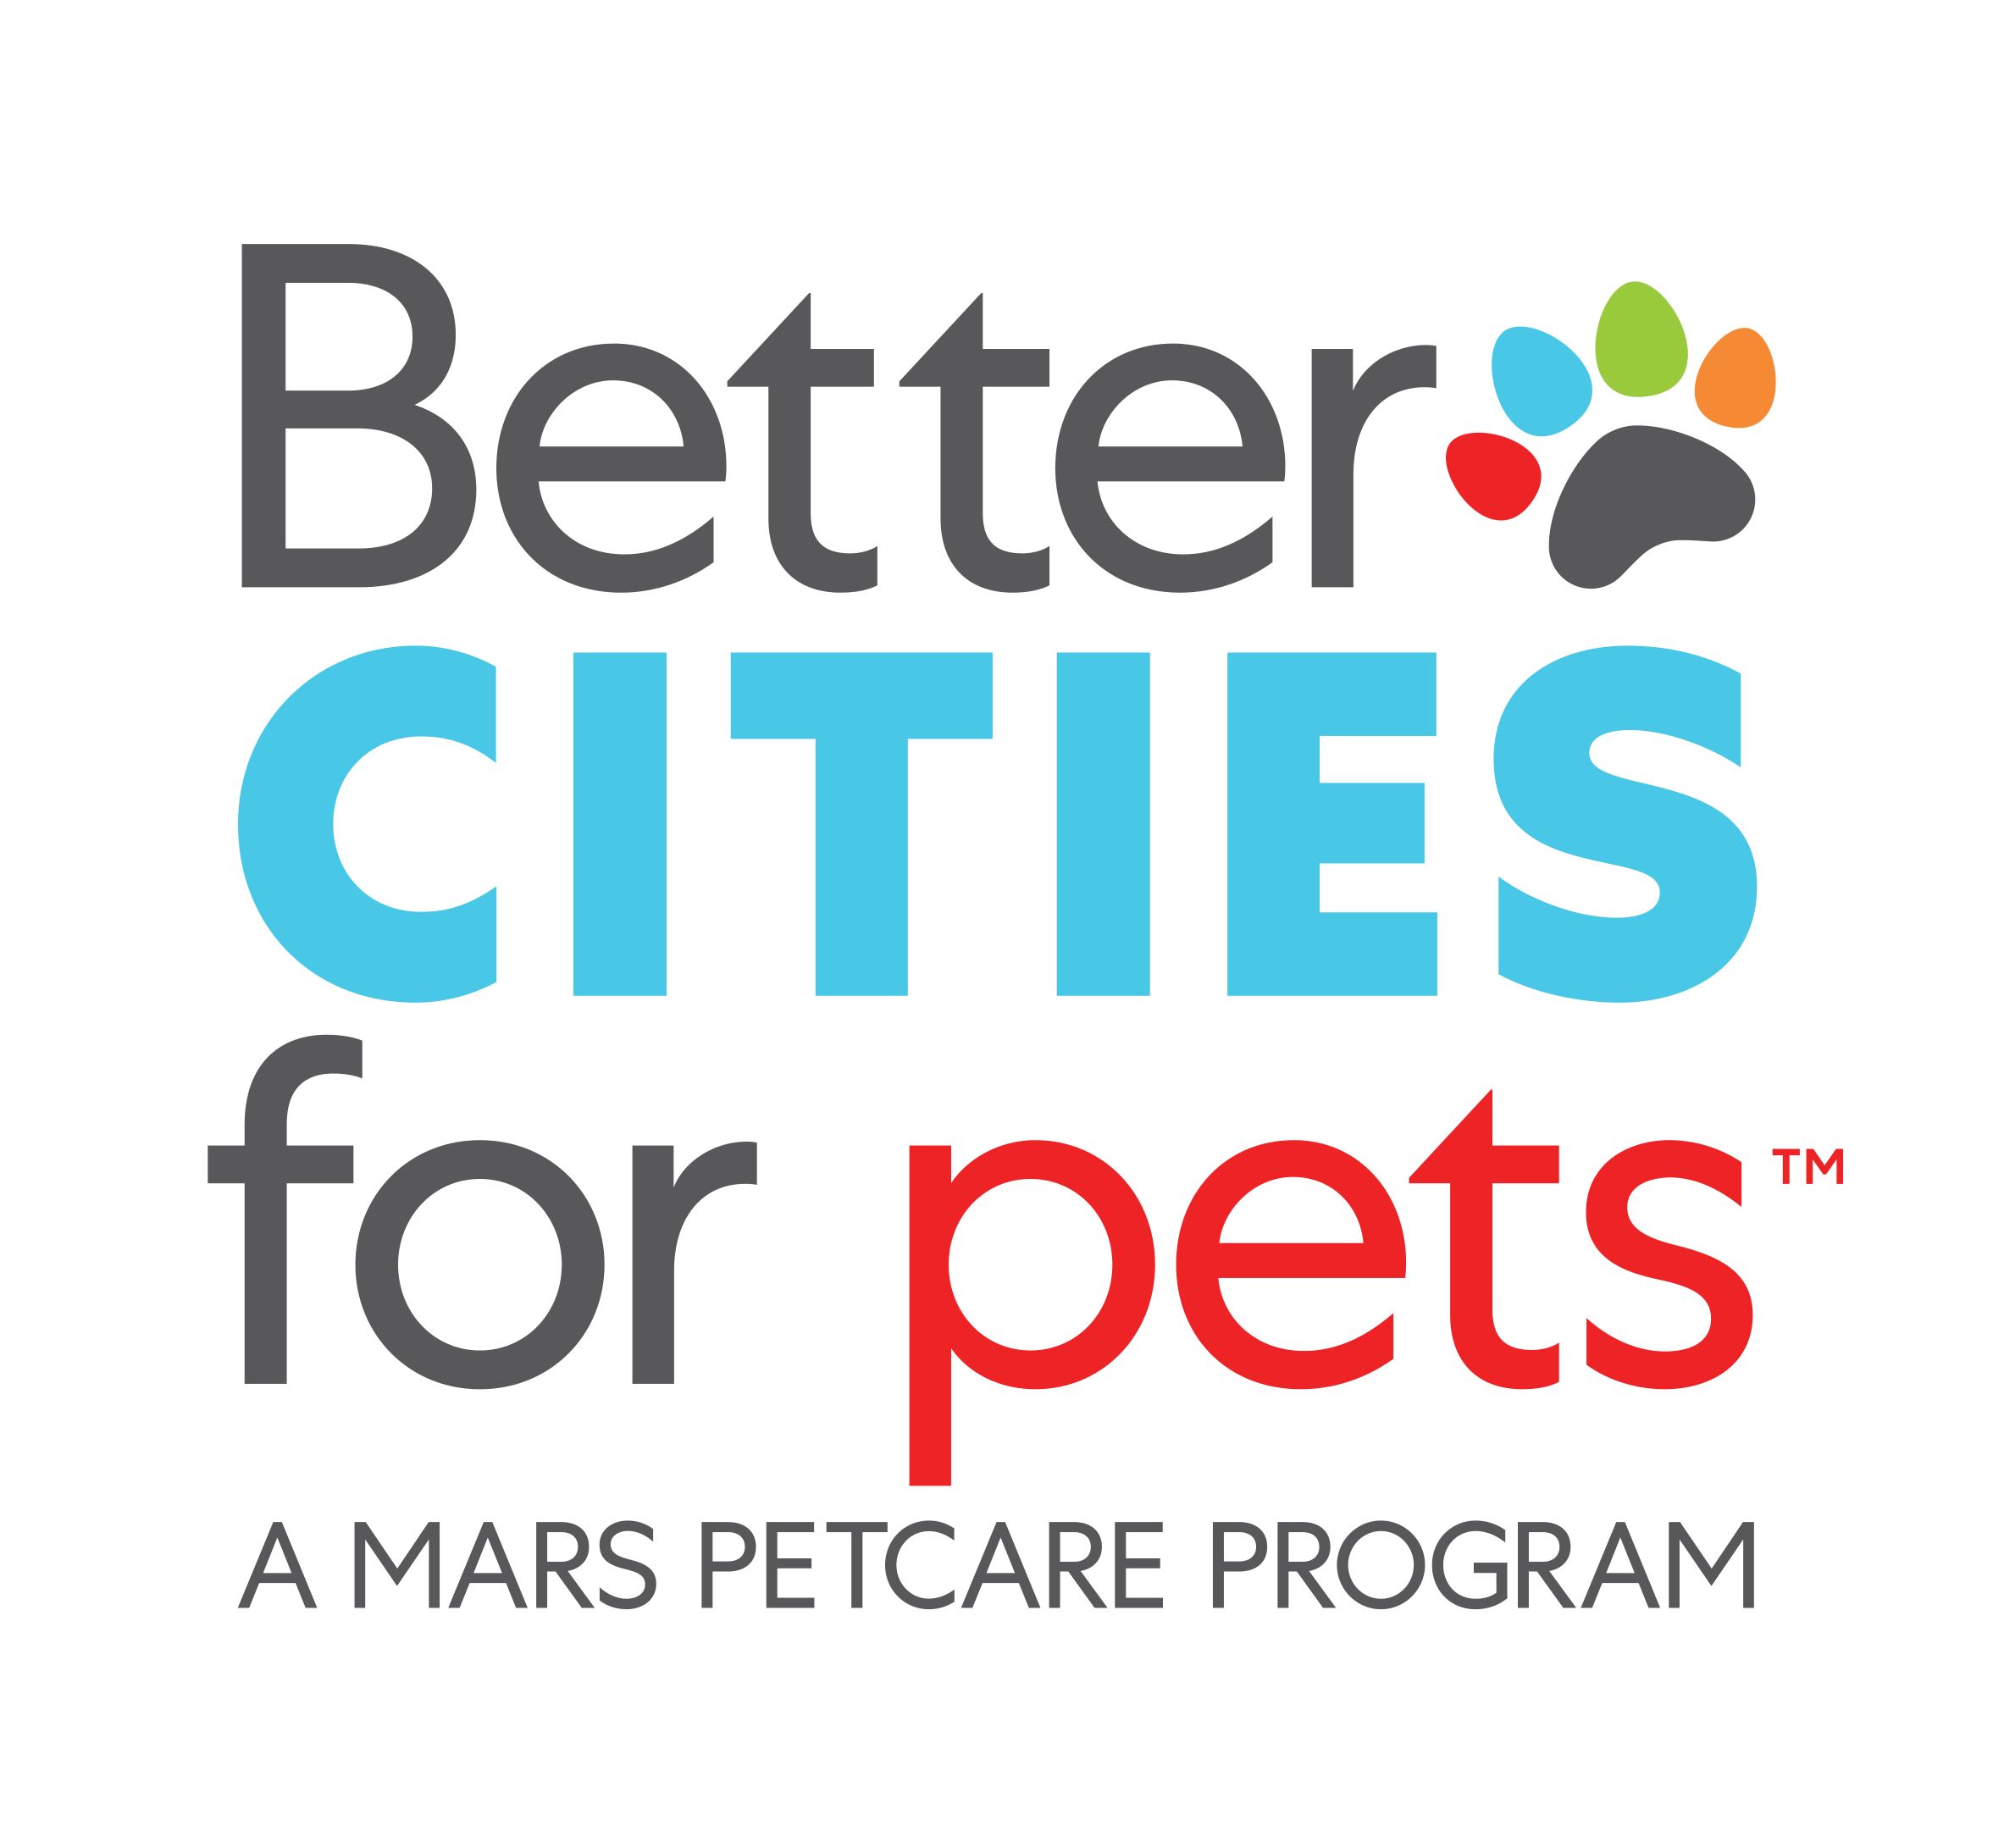 better cities for pets